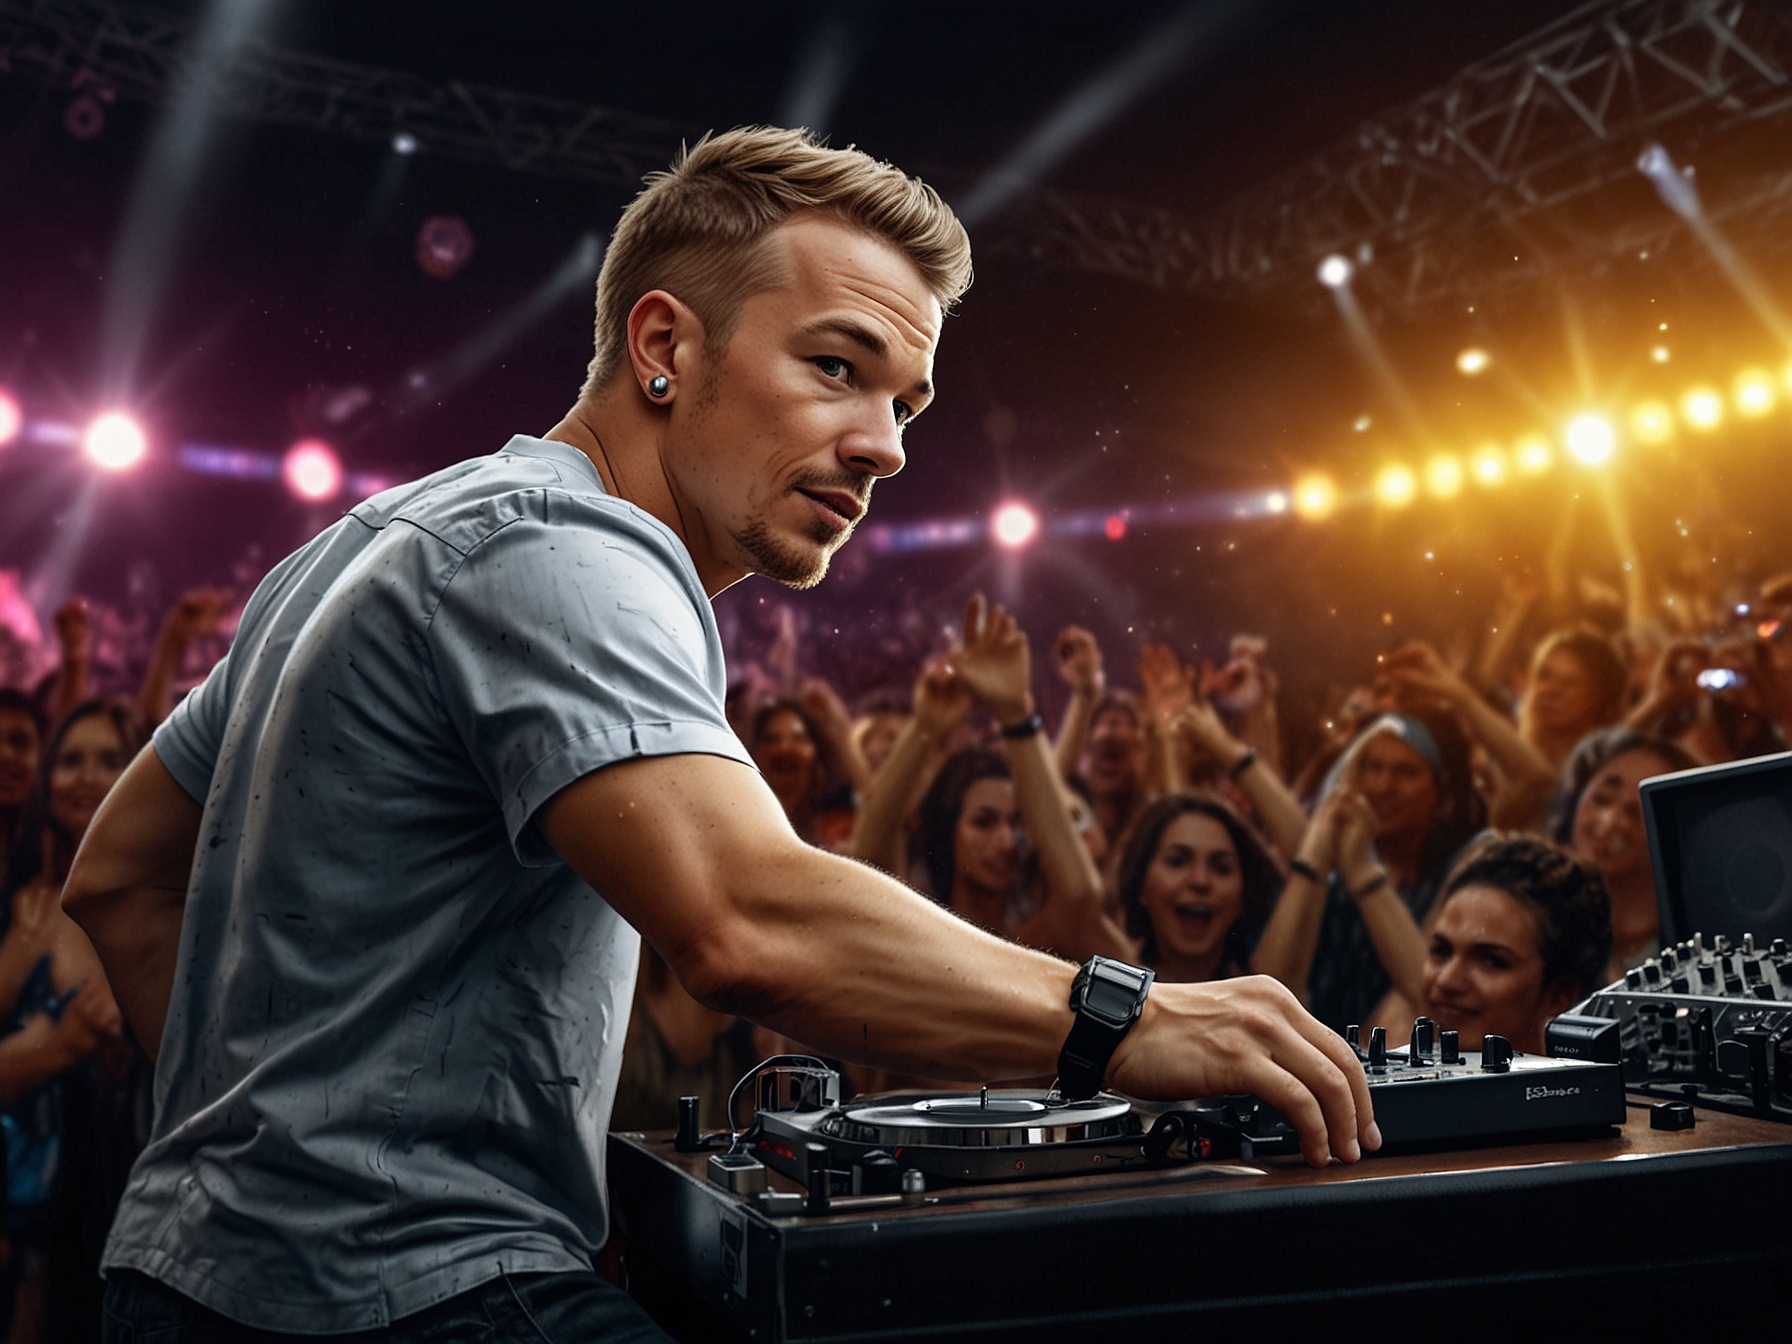 Diplo performing at a major music festival, showcasing his energetic style and connecting with an enthusiastic audience, highlighting his prominence as a global DJ and producer.